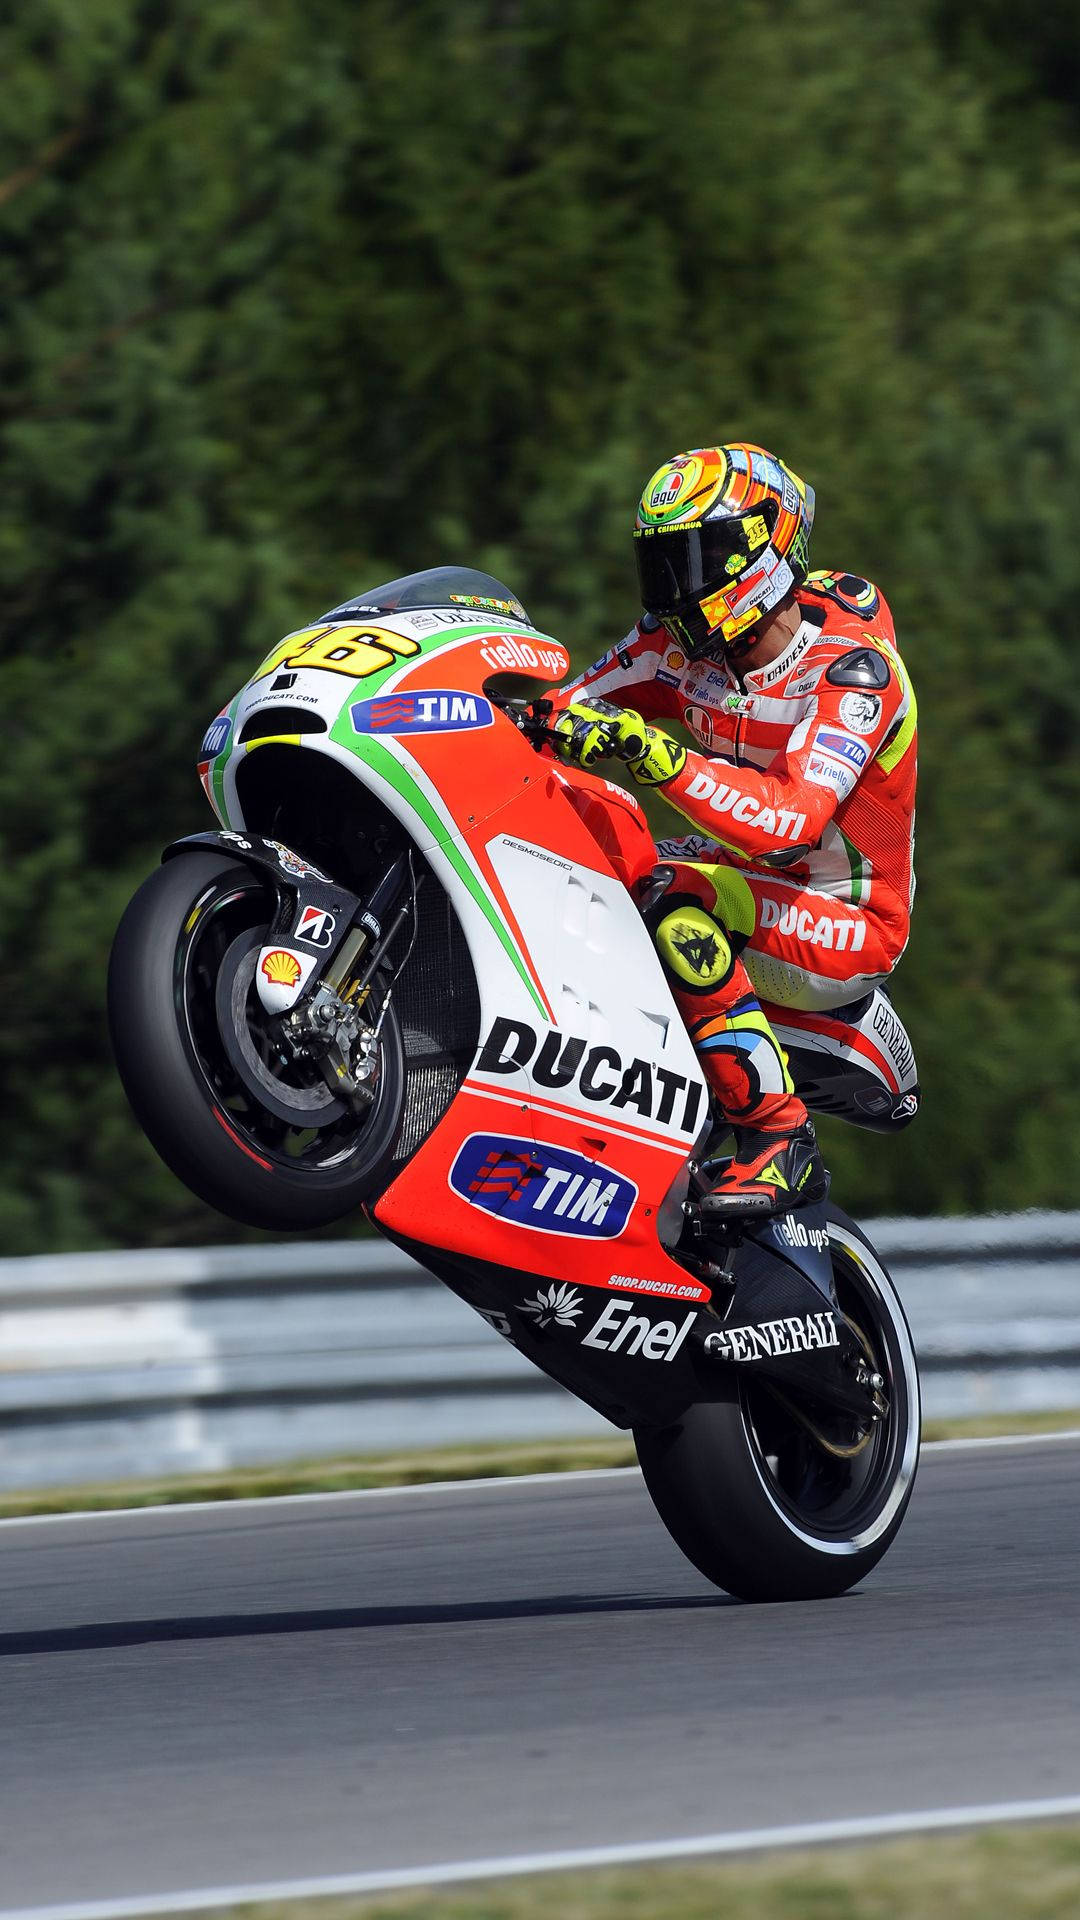 Valentino Rossi Racing on a Red Ducati GP11 Wallpaper